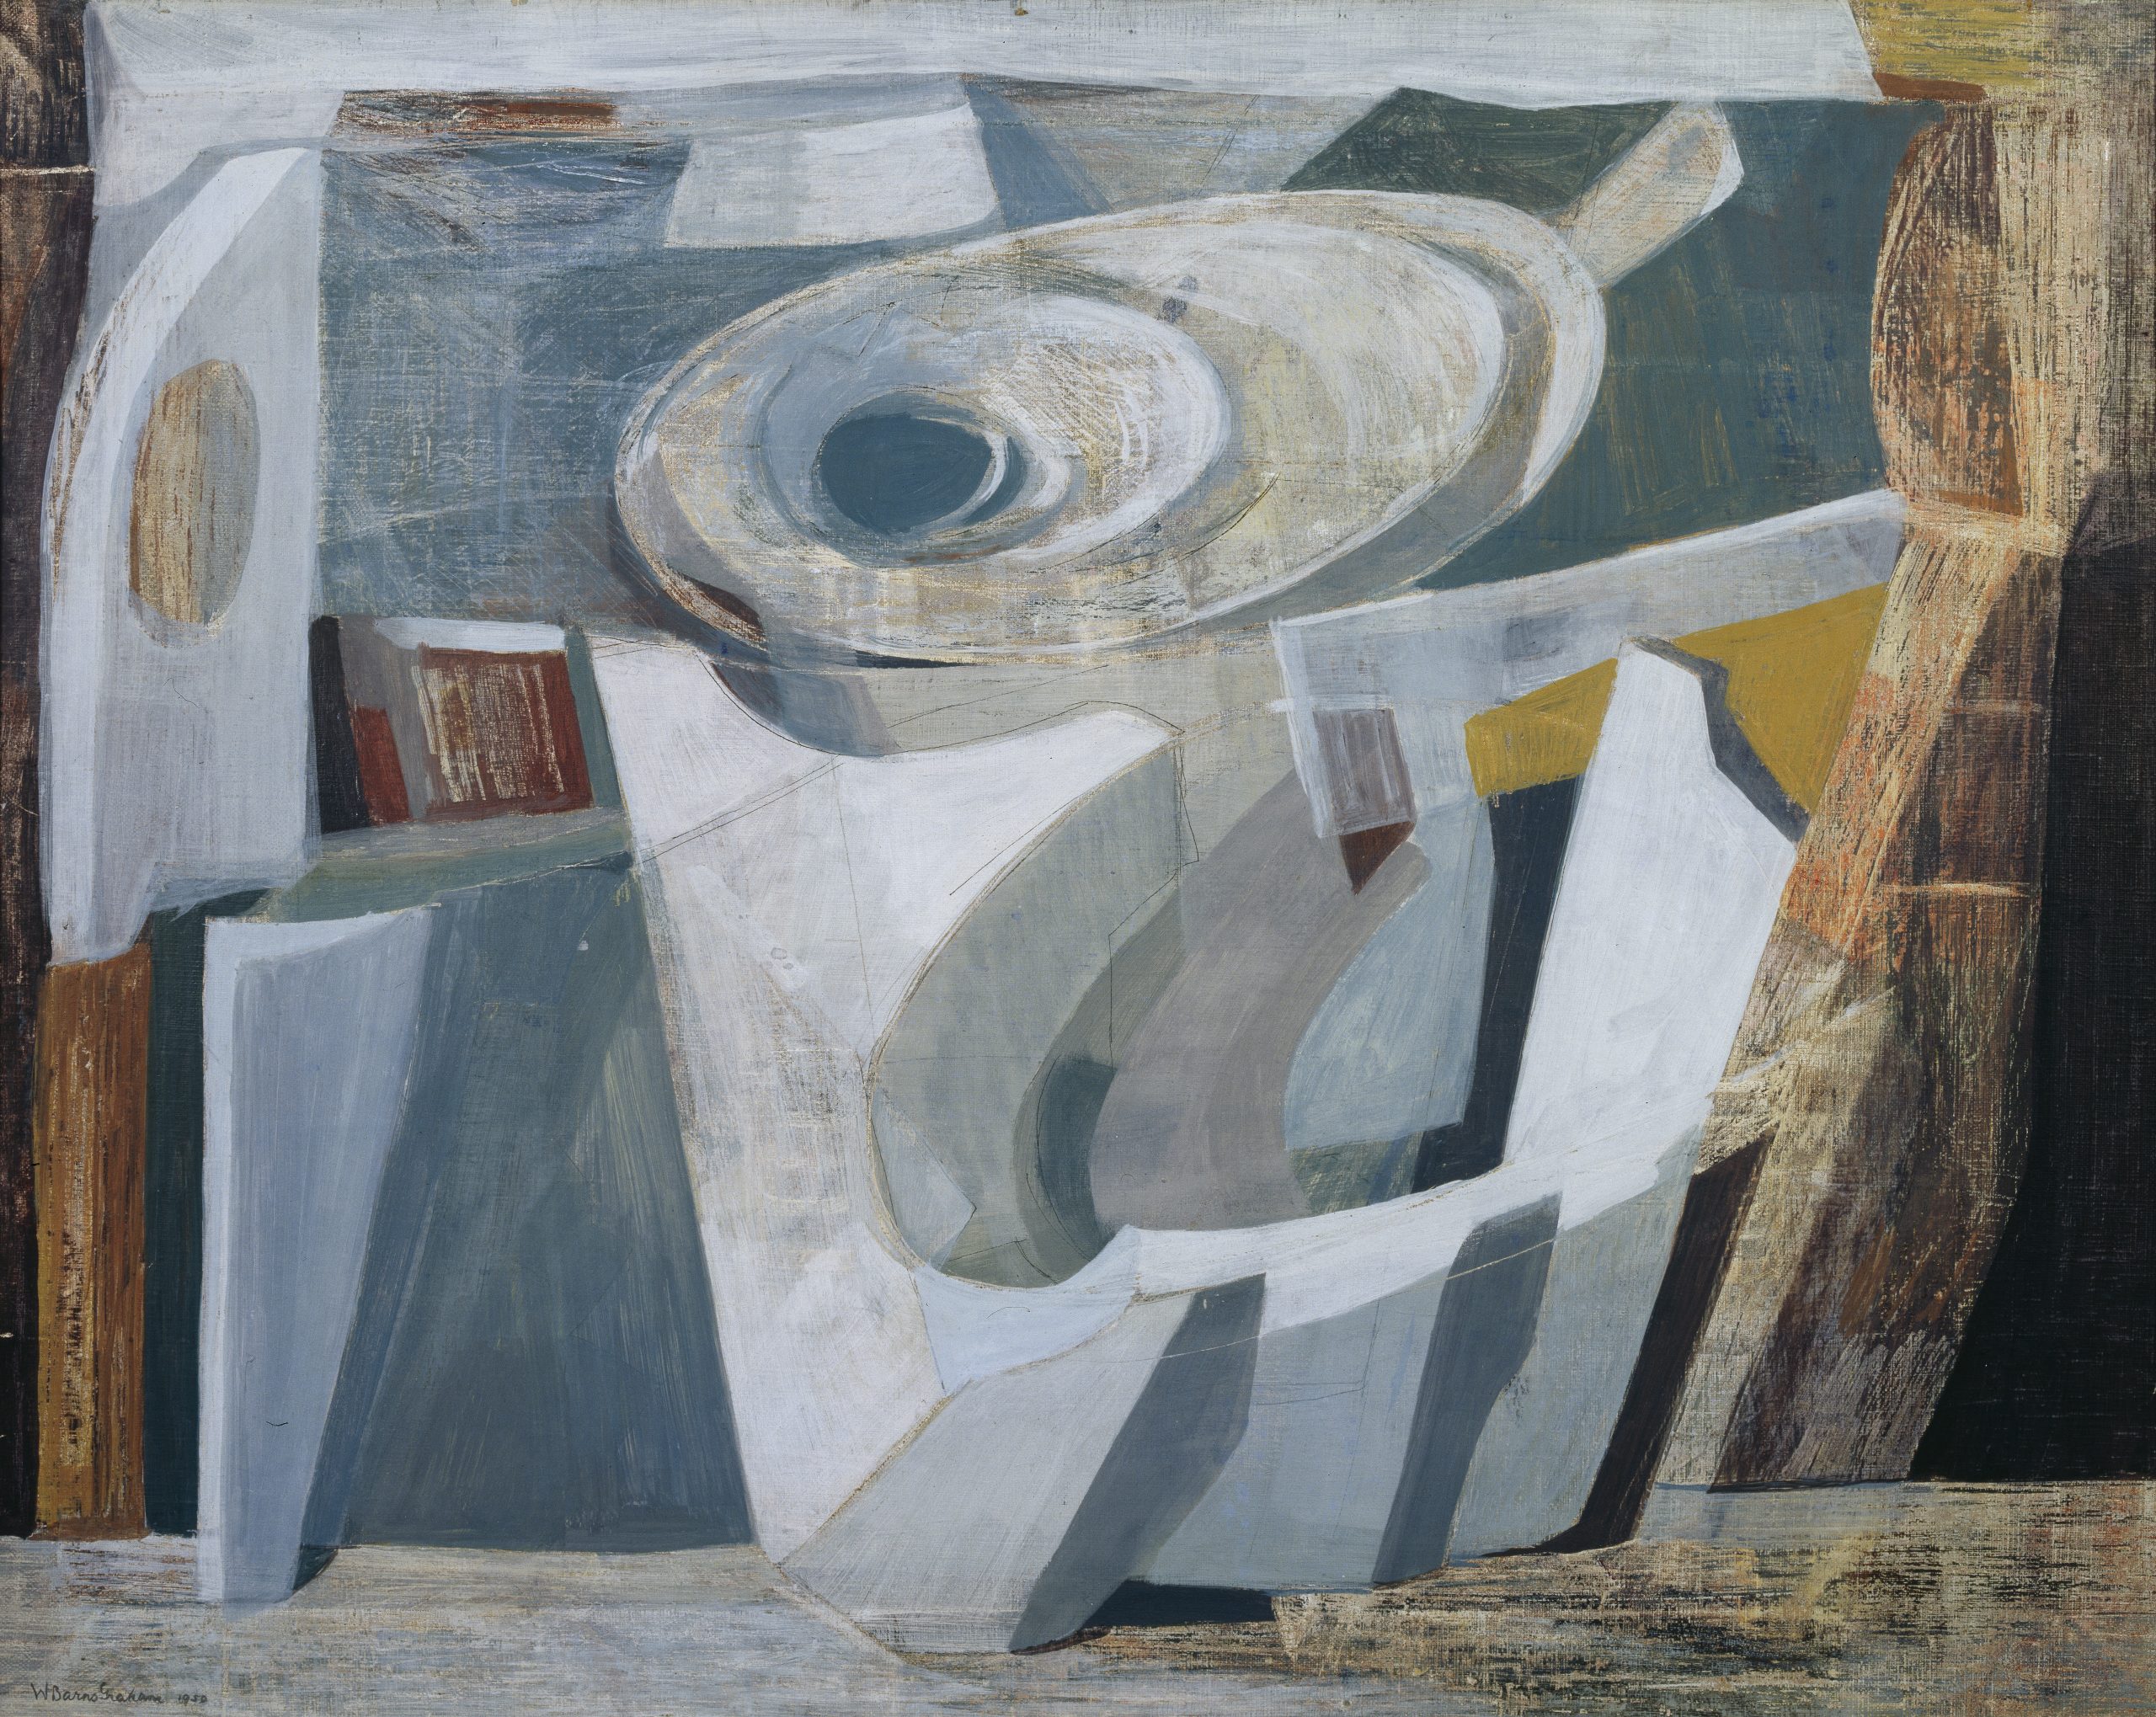 An oil painting of complex geometric shapes in greys whites and blues representing a glacier